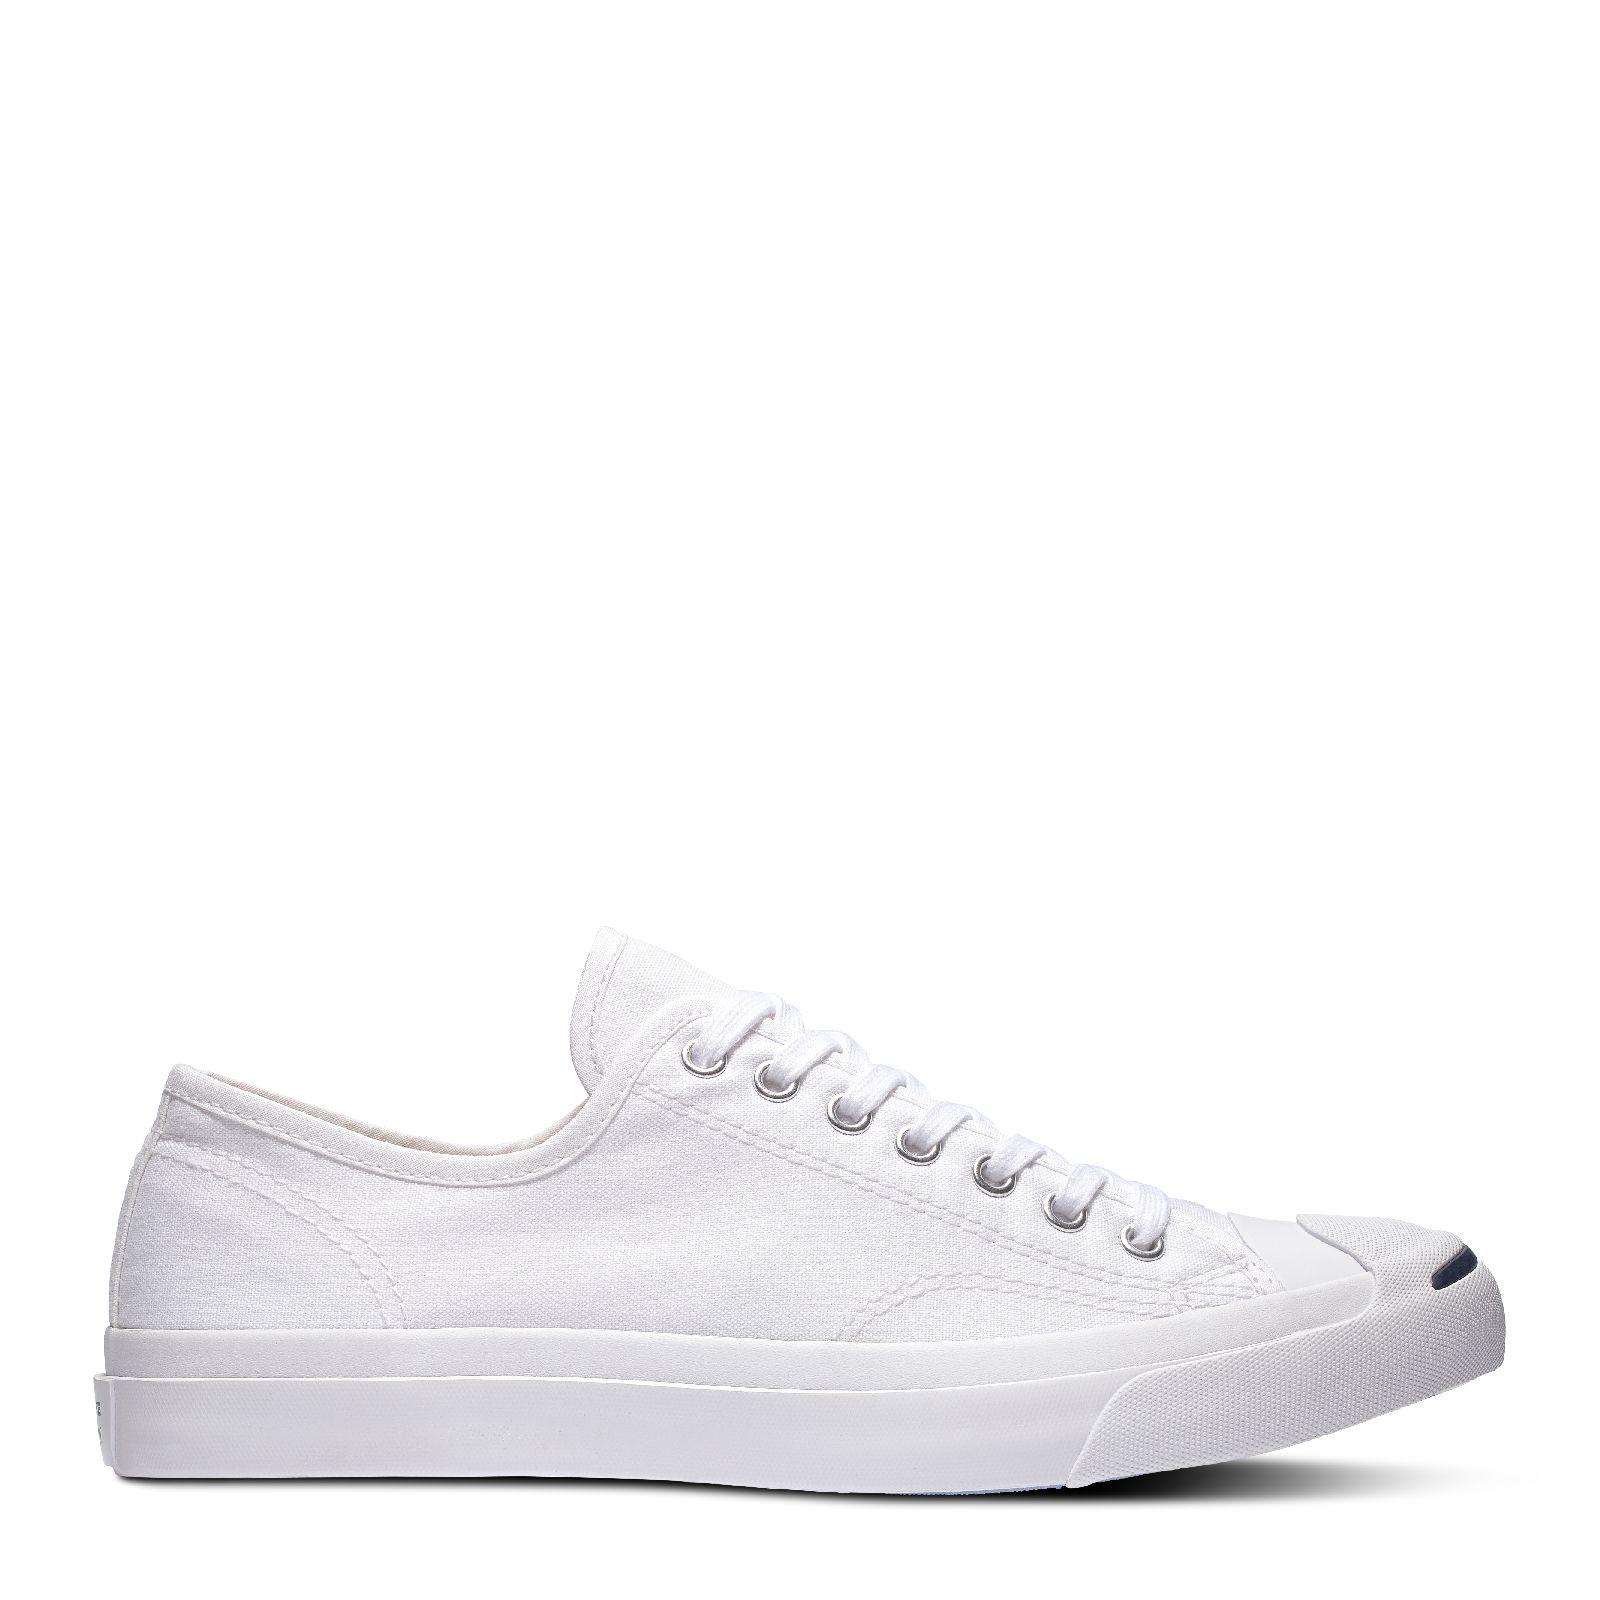 Converse Jack Purcell Jack - Ox - White 